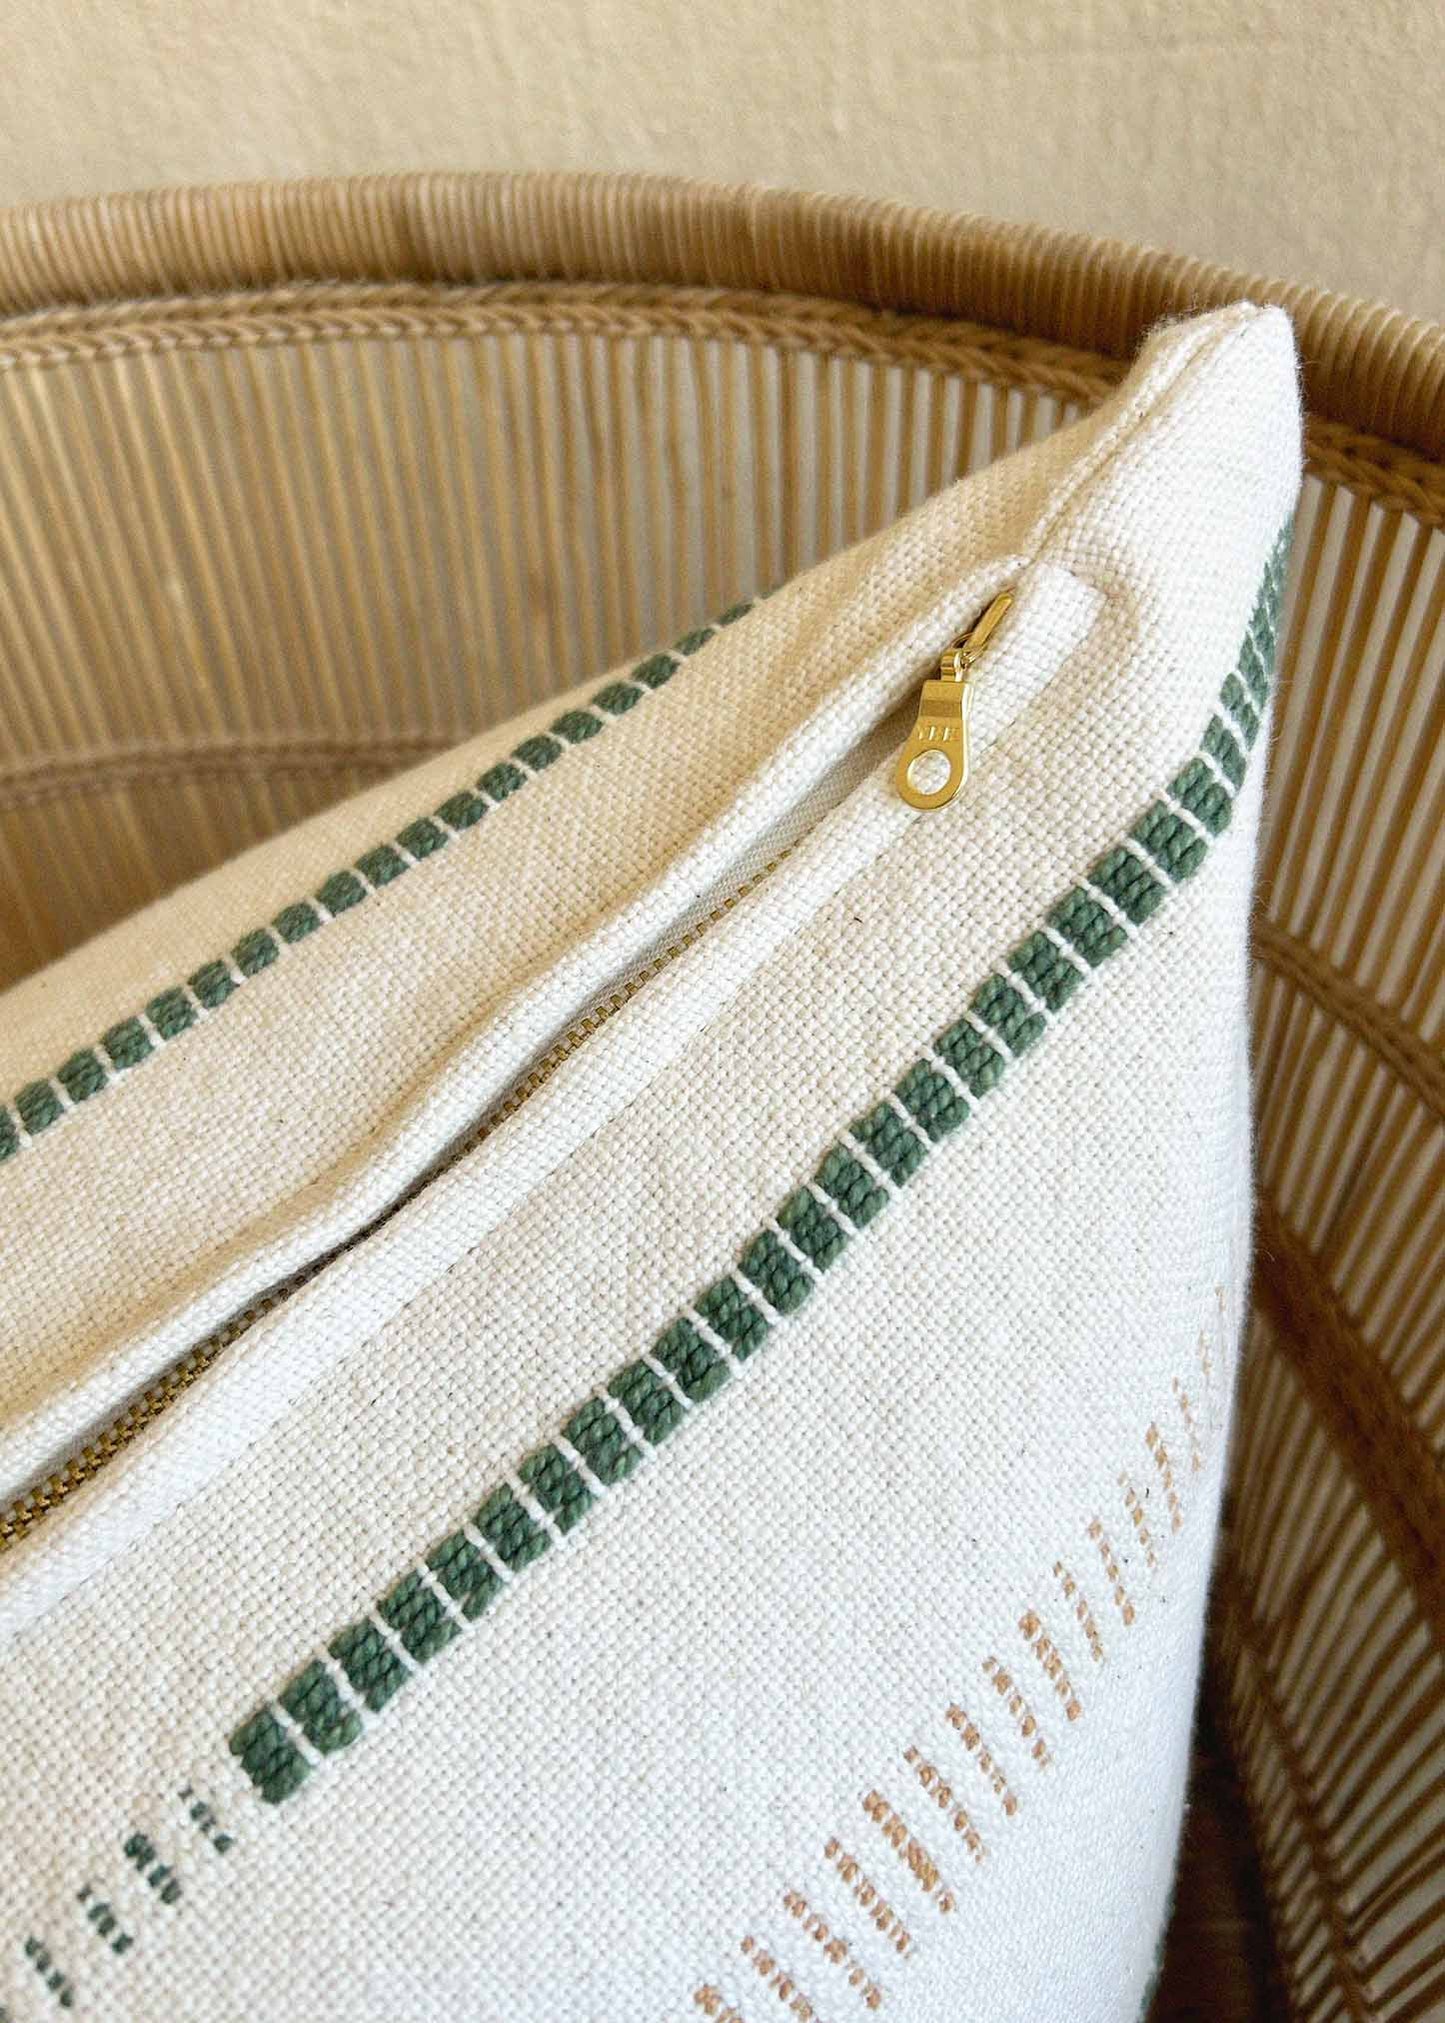 The Mason Cushion, uniquely handwoven in Cape Town using natural, local cotton